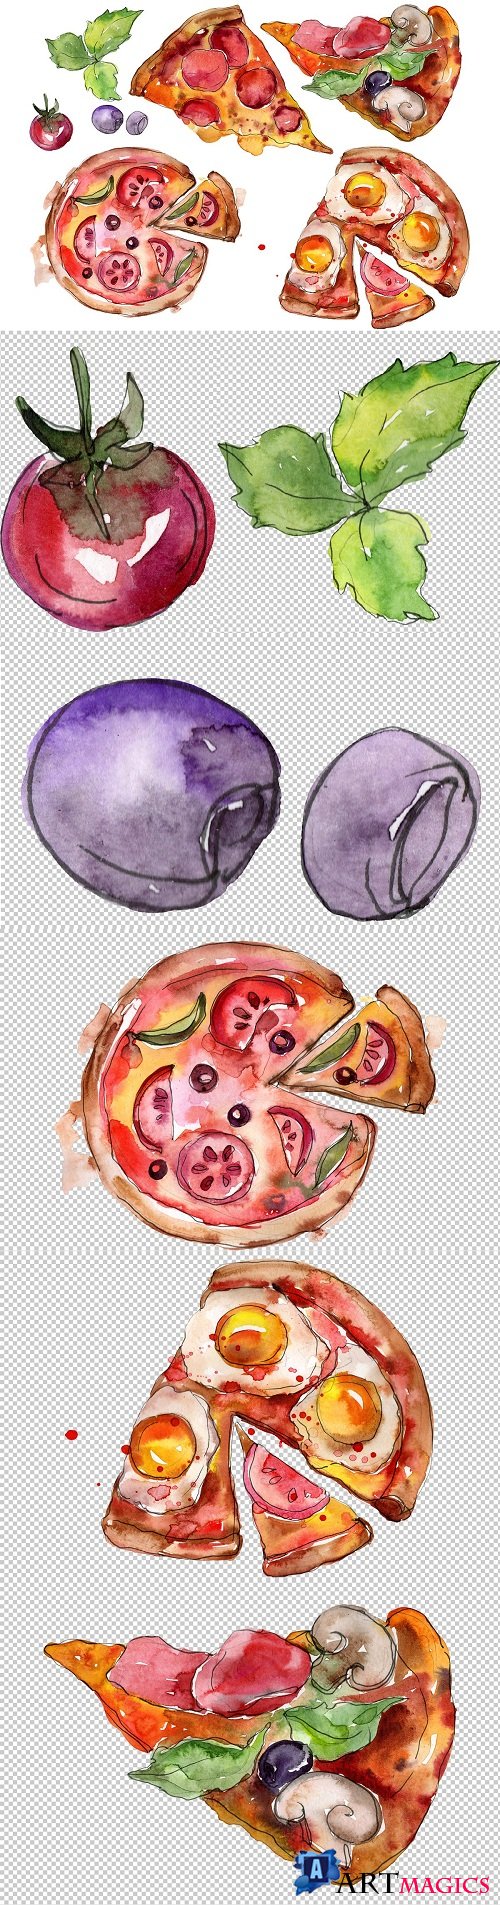 Pizza vegetable Watercolor png - 3470116